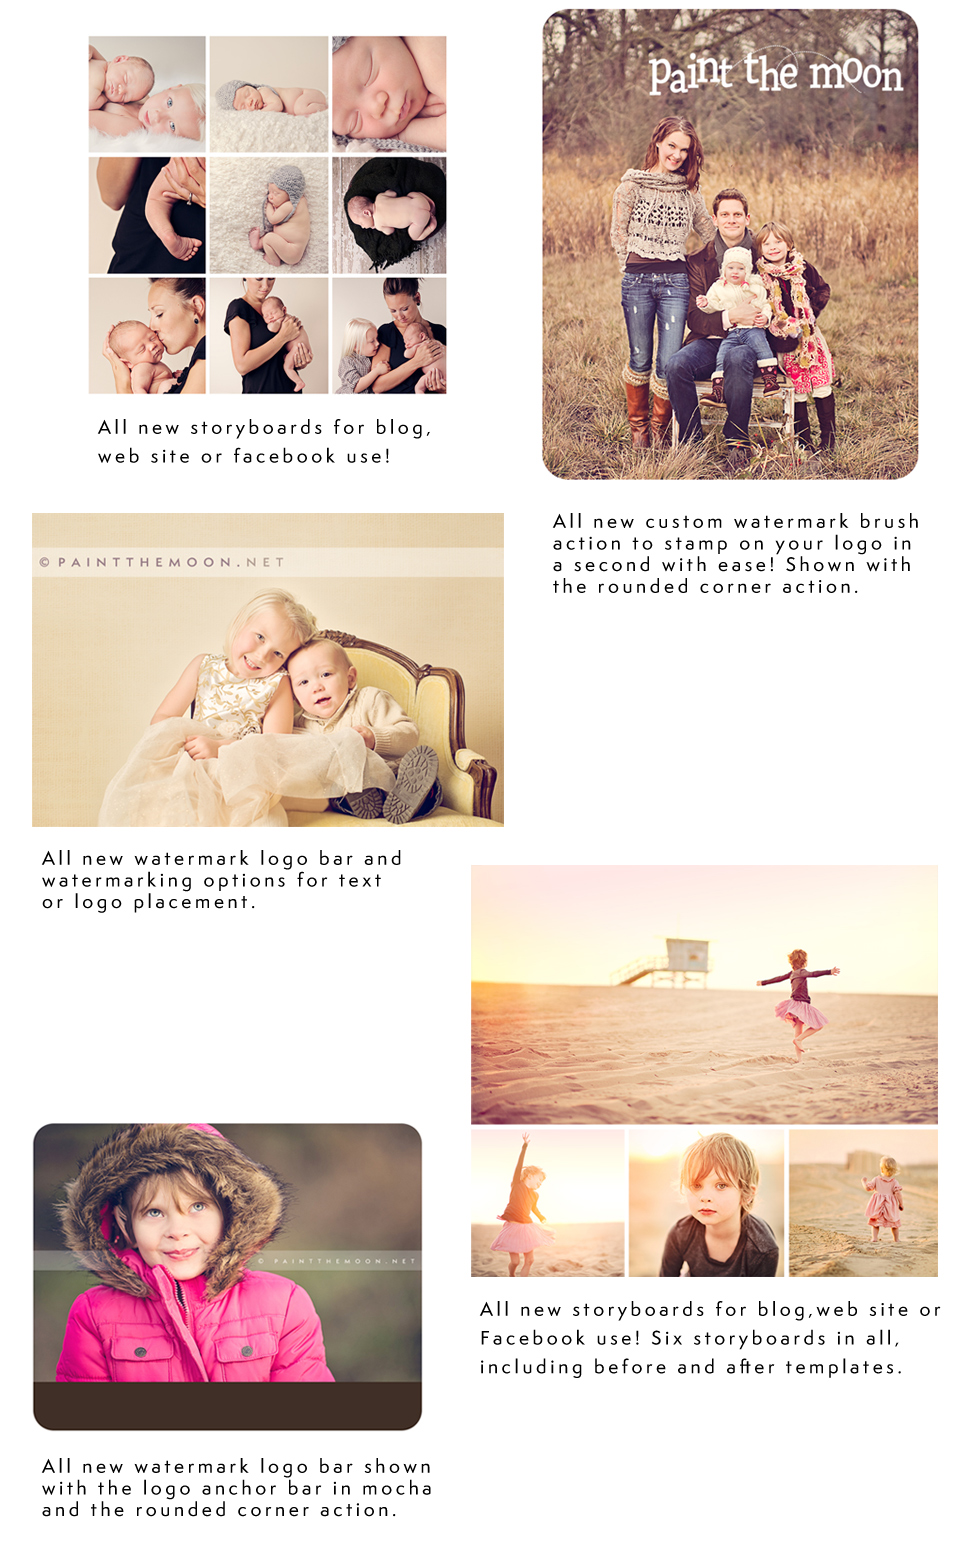 Resizing, sharpening, rounded corners, watermarks and more. Plus collage storyboard templates!